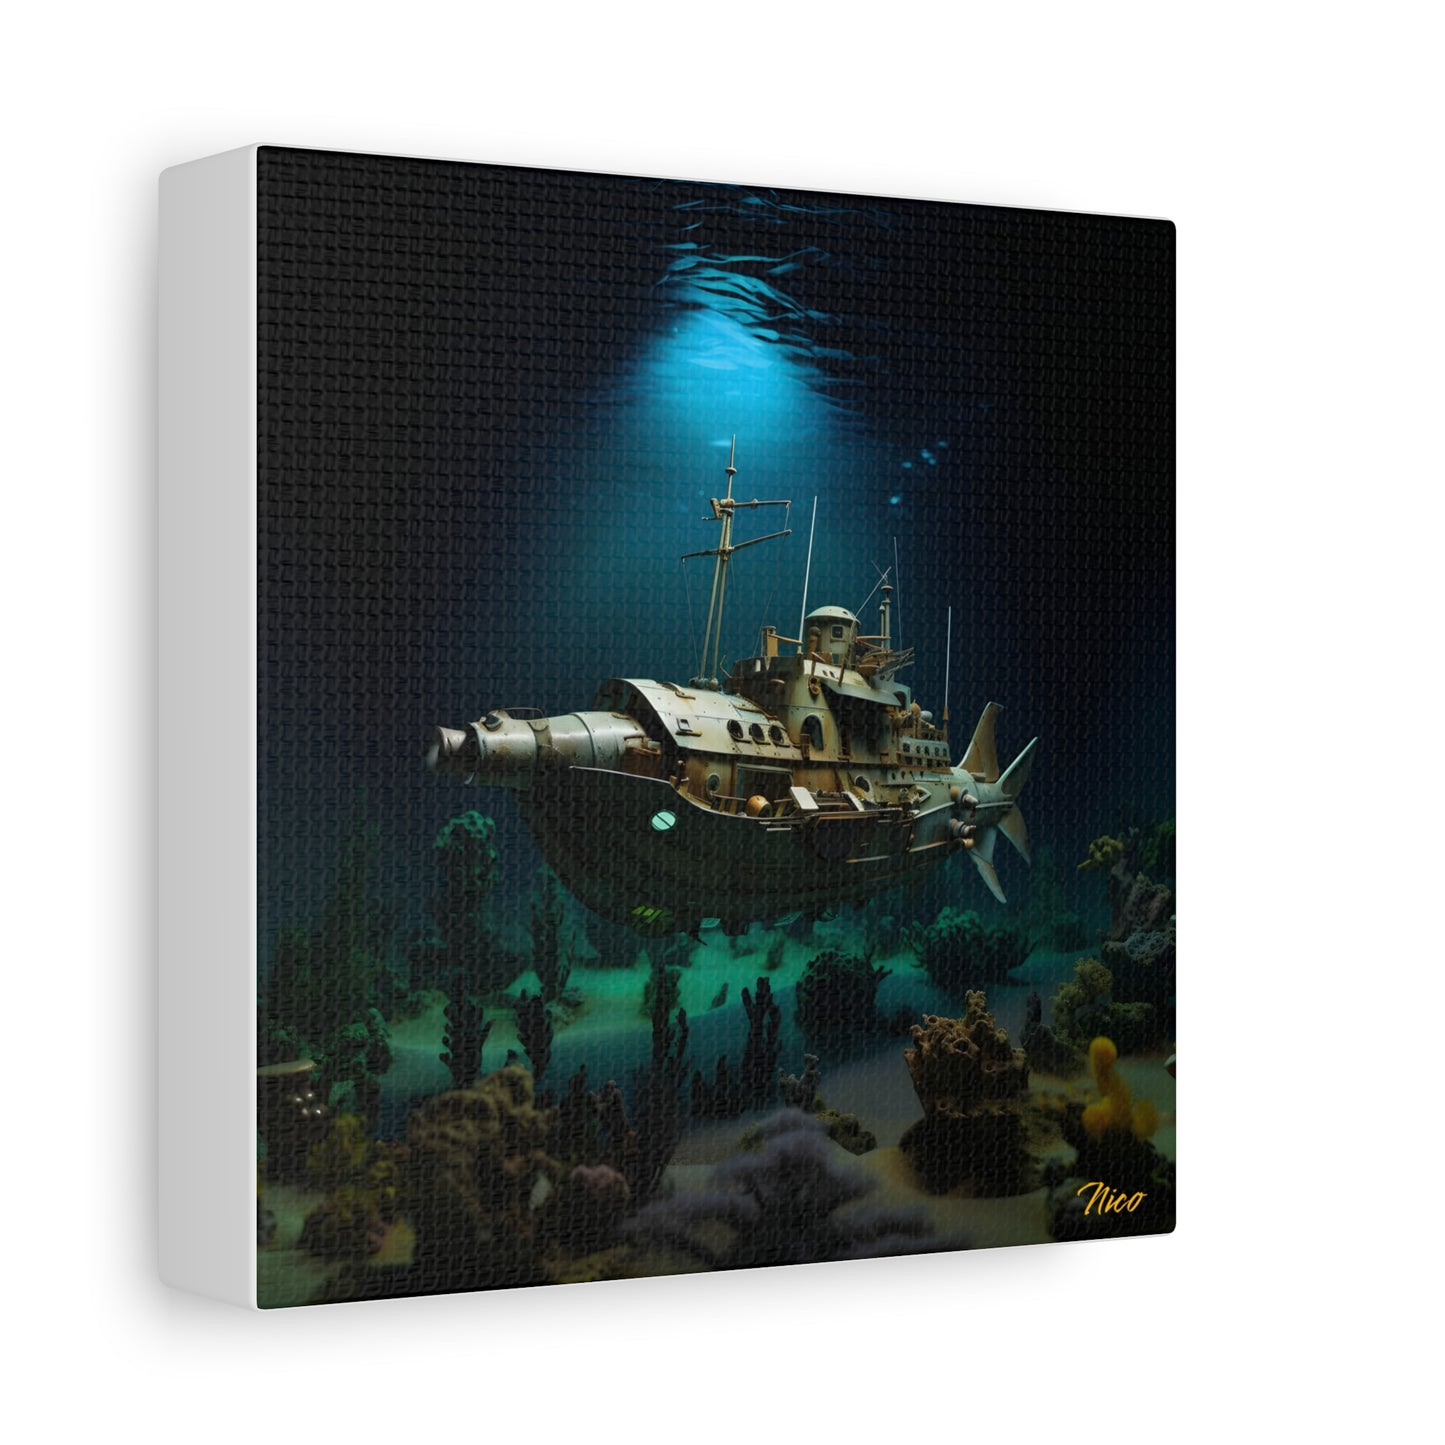 20,000 Leagues Under The Sea Series Print #7 - Streched Matte Canvas Print, 1.25" Thick